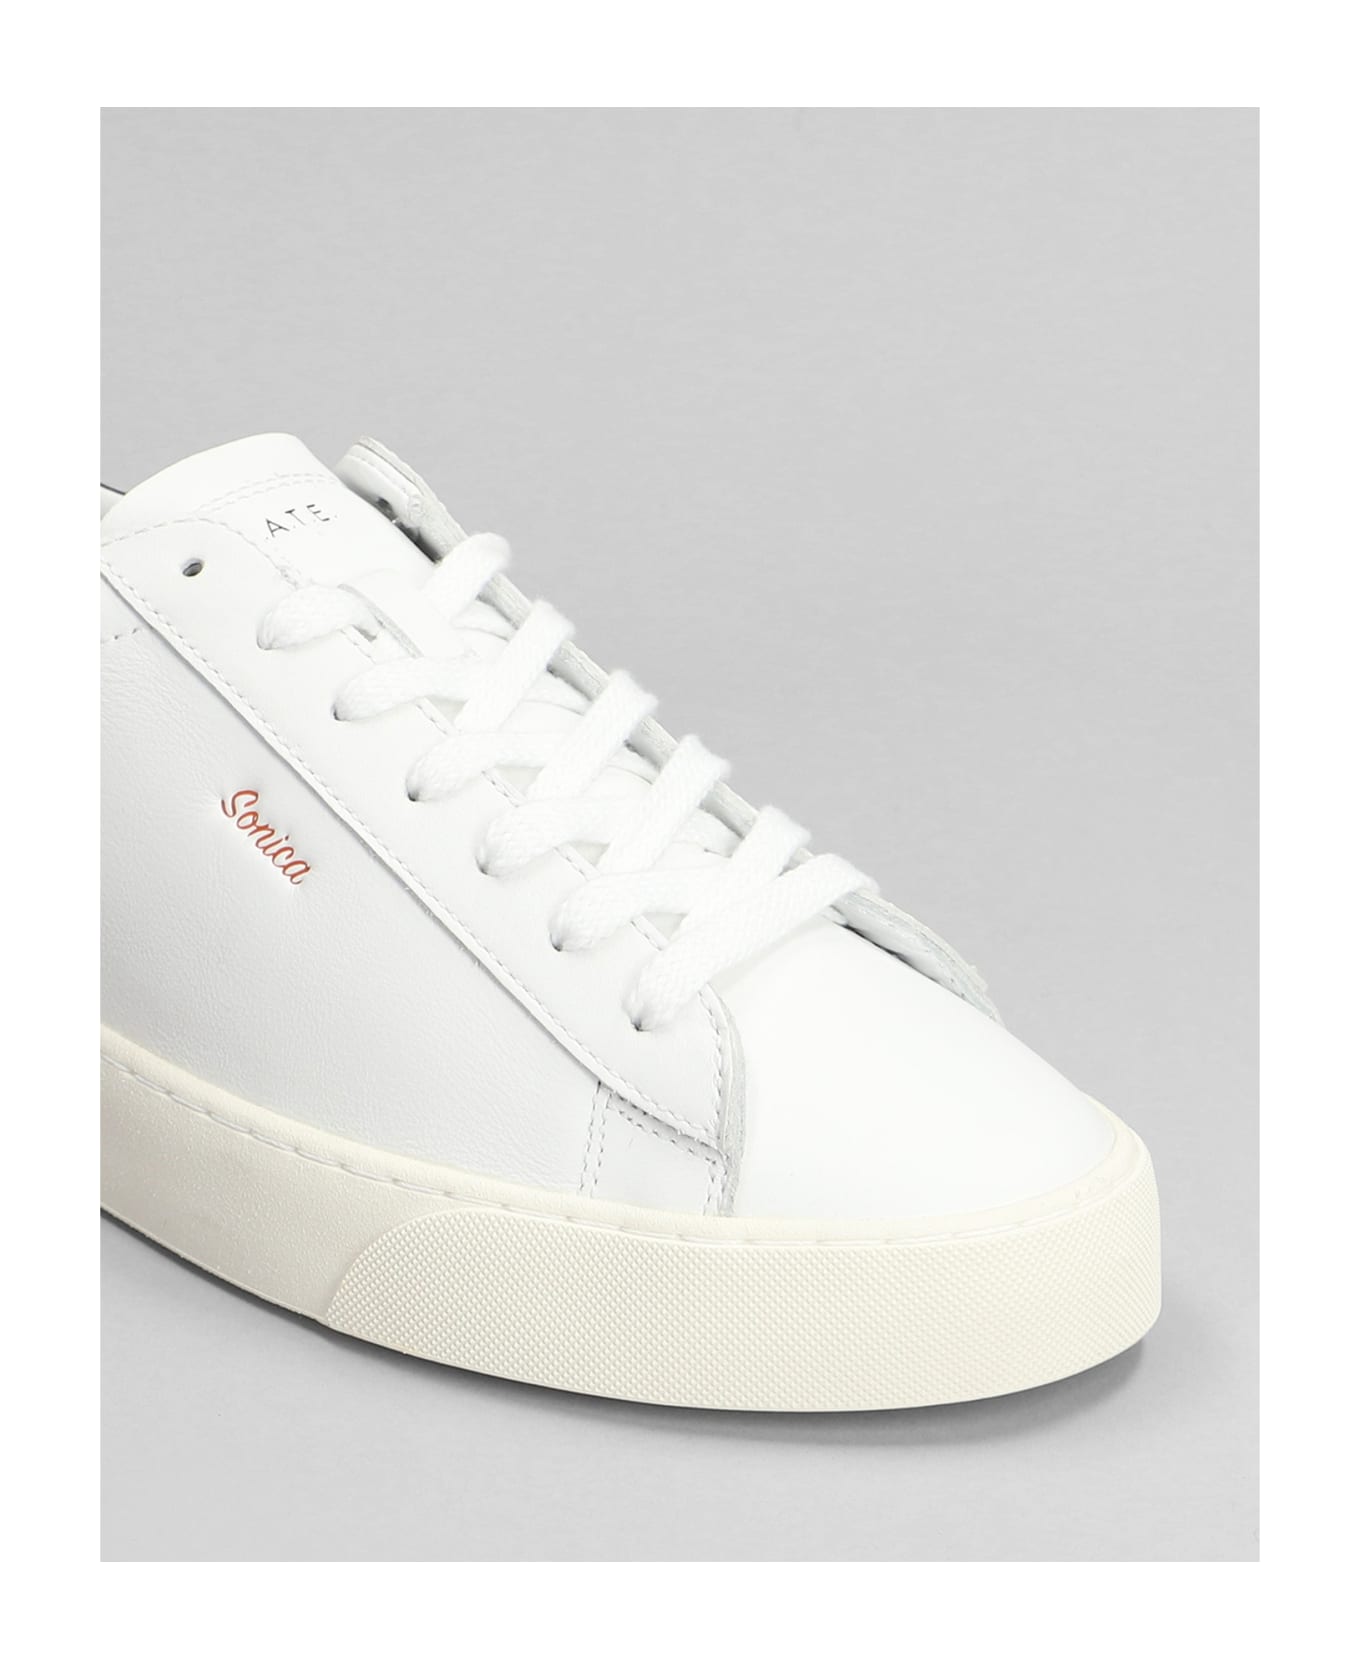 D.A.T.E. Sonica Sneakers In White Leather - white スニーカー